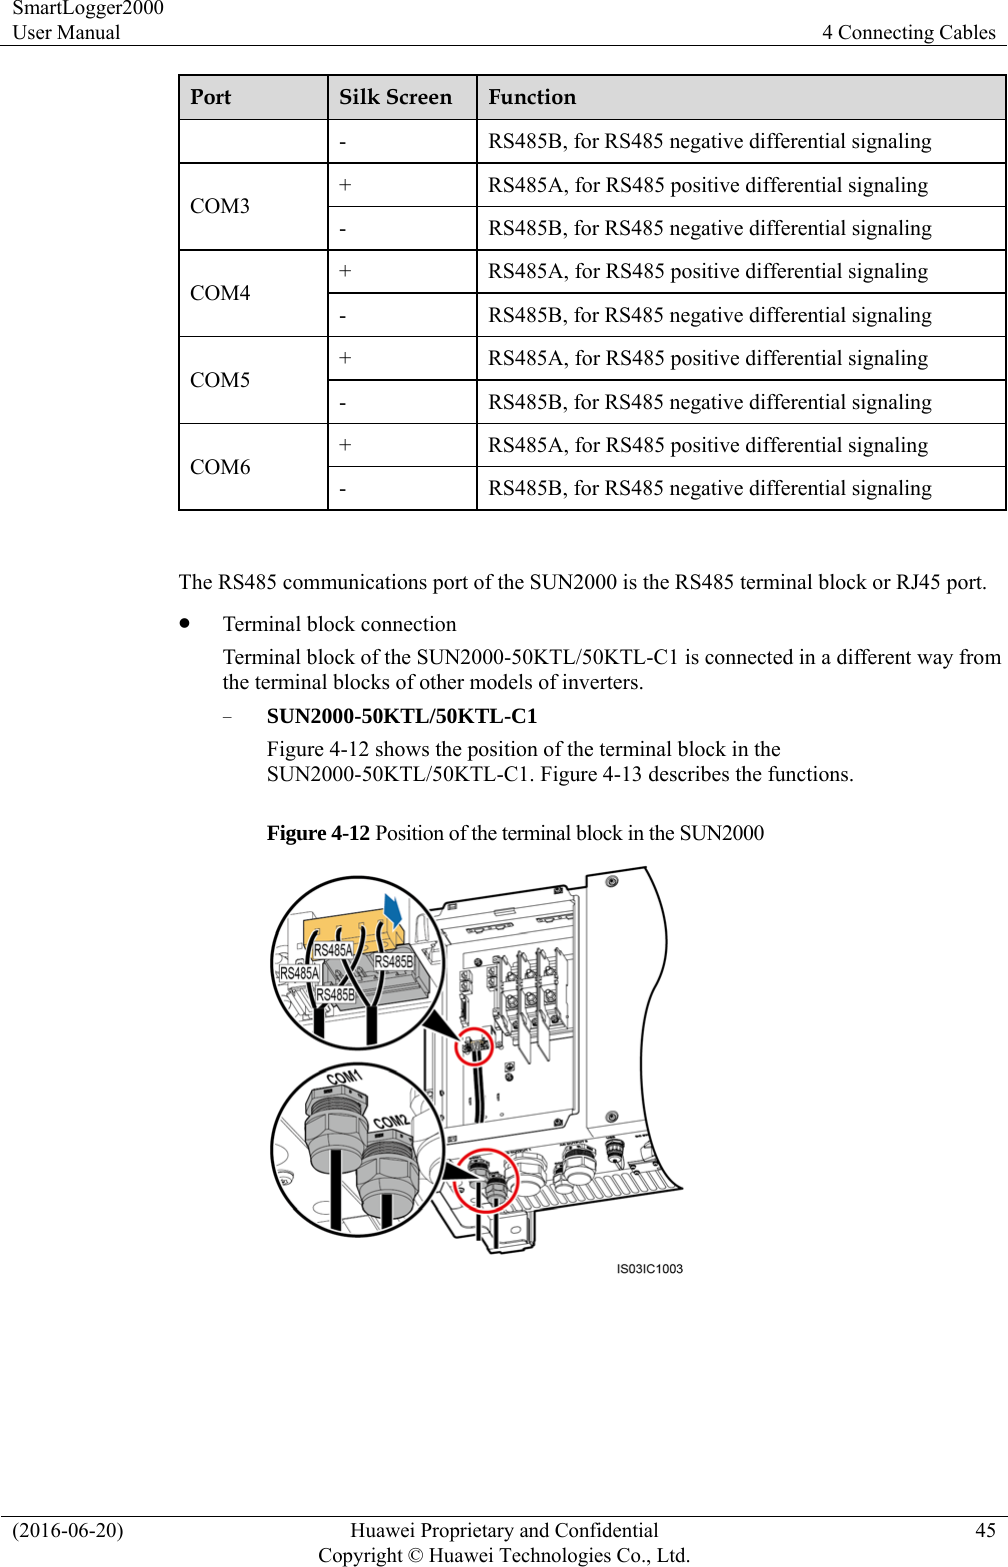 SmartLogger2000 User Manual  4 Connecting Cables (2016-06-20)  Huawei Proprietary and Confidential         Copyright © Huawei Technologies Co., Ltd.45 Port  Silk Screen  Function -  RS485B, for RS485 negative differential signaling COM3 +  RS485A, for RS485 positive differential signaling -  RS485B, for RS485 negative differential signaling COM4 +  RS485A, for RS485 positive differential signaling -  RS485B, for RS485 negative differential signaling COM5 +  RS485A, for RS485 positive differential signaling -  RS485B, for RS485 negative differential signaling COM6 +  RS485A, for RS485 positive differential signaling -  RS485B, for RS485 negative differential signaling  The RS485 communications port of the SUN2000 is the RS485 terminal block or RJ45 port.  Terminal block connection Terminal block of the SUN2000-50KTL/50KTL-C1 is connected in a different way from the terminal blocks of other models of inverters. − SUN2000-50KTL/50KTL-C1 Figure 4-12 shows the position of the terminal block in the SUN2000-50KTL/50KTL-C1. Figure 4-13 describes the functions. Figure 4-12 Position of the terminal block in the SUN2000   